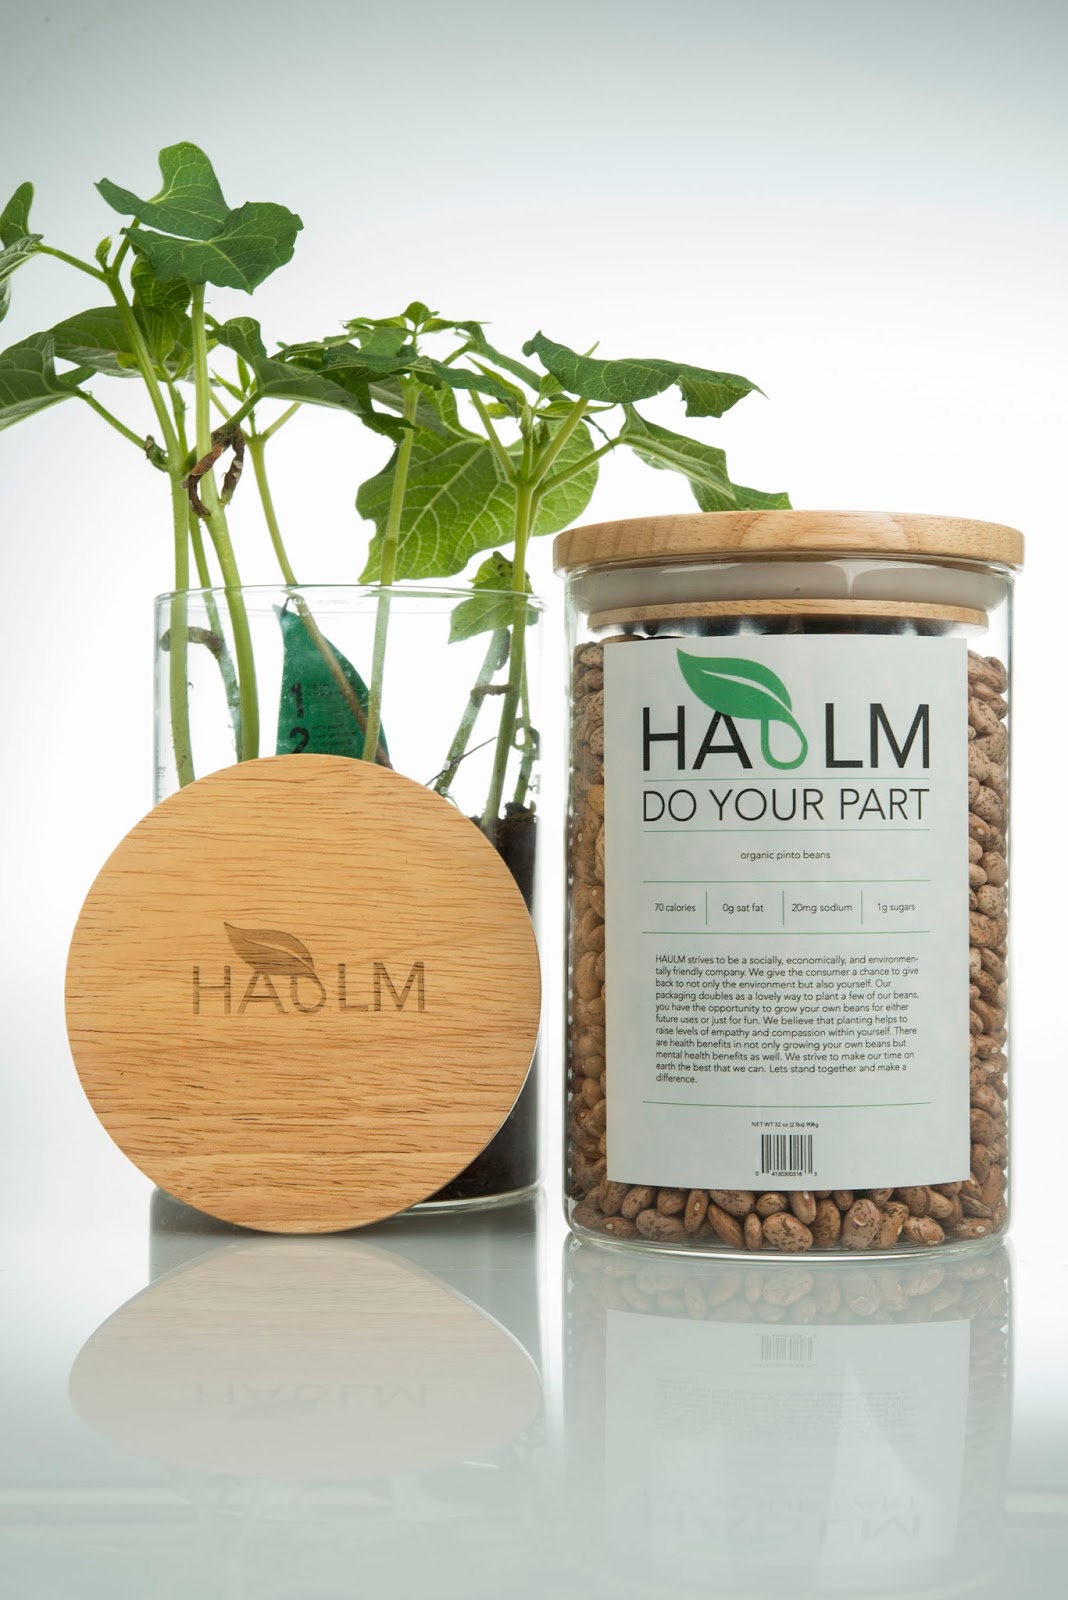 Haulm earth day plant label designed by Brenna Veenstra